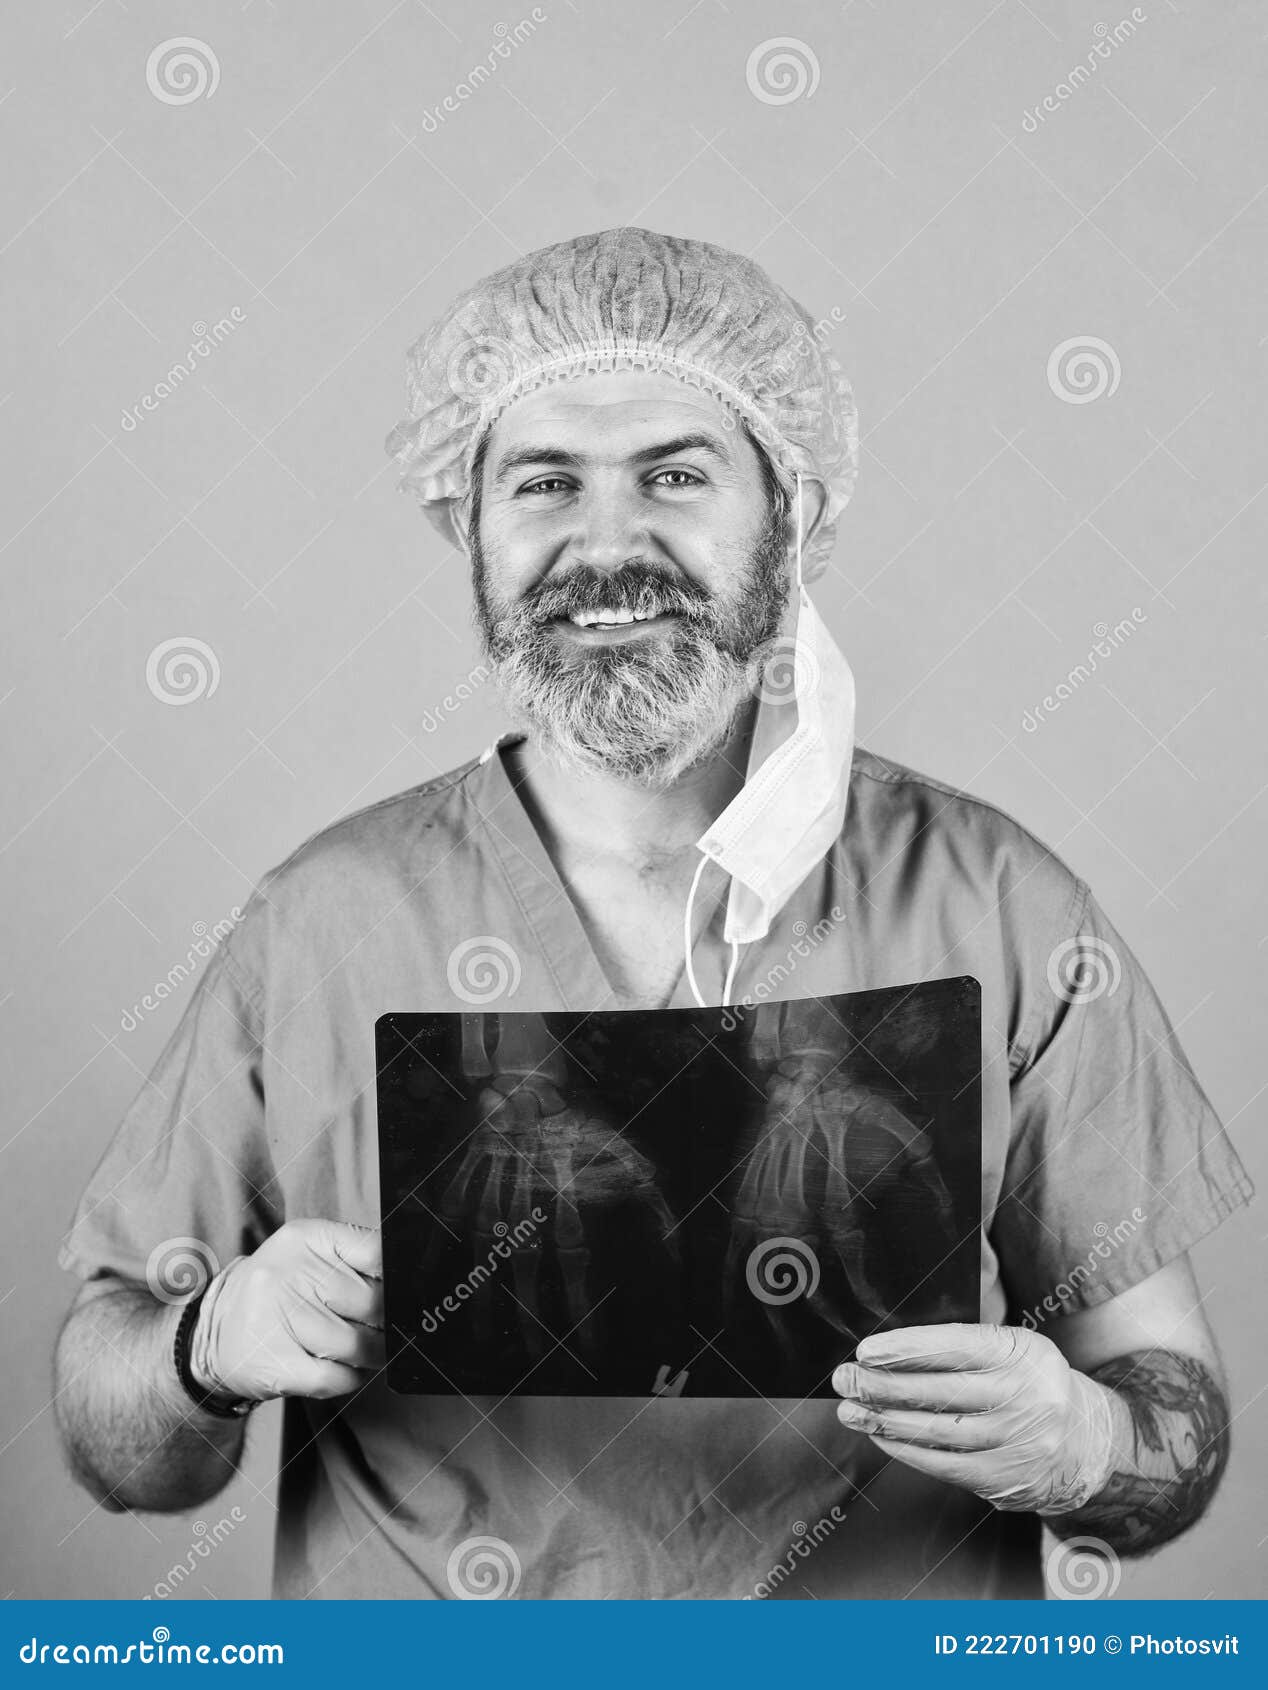 doctor holds pictures of bones. fracture and bone damage. doctor examines radiographic snapshot of wrist. surgeon